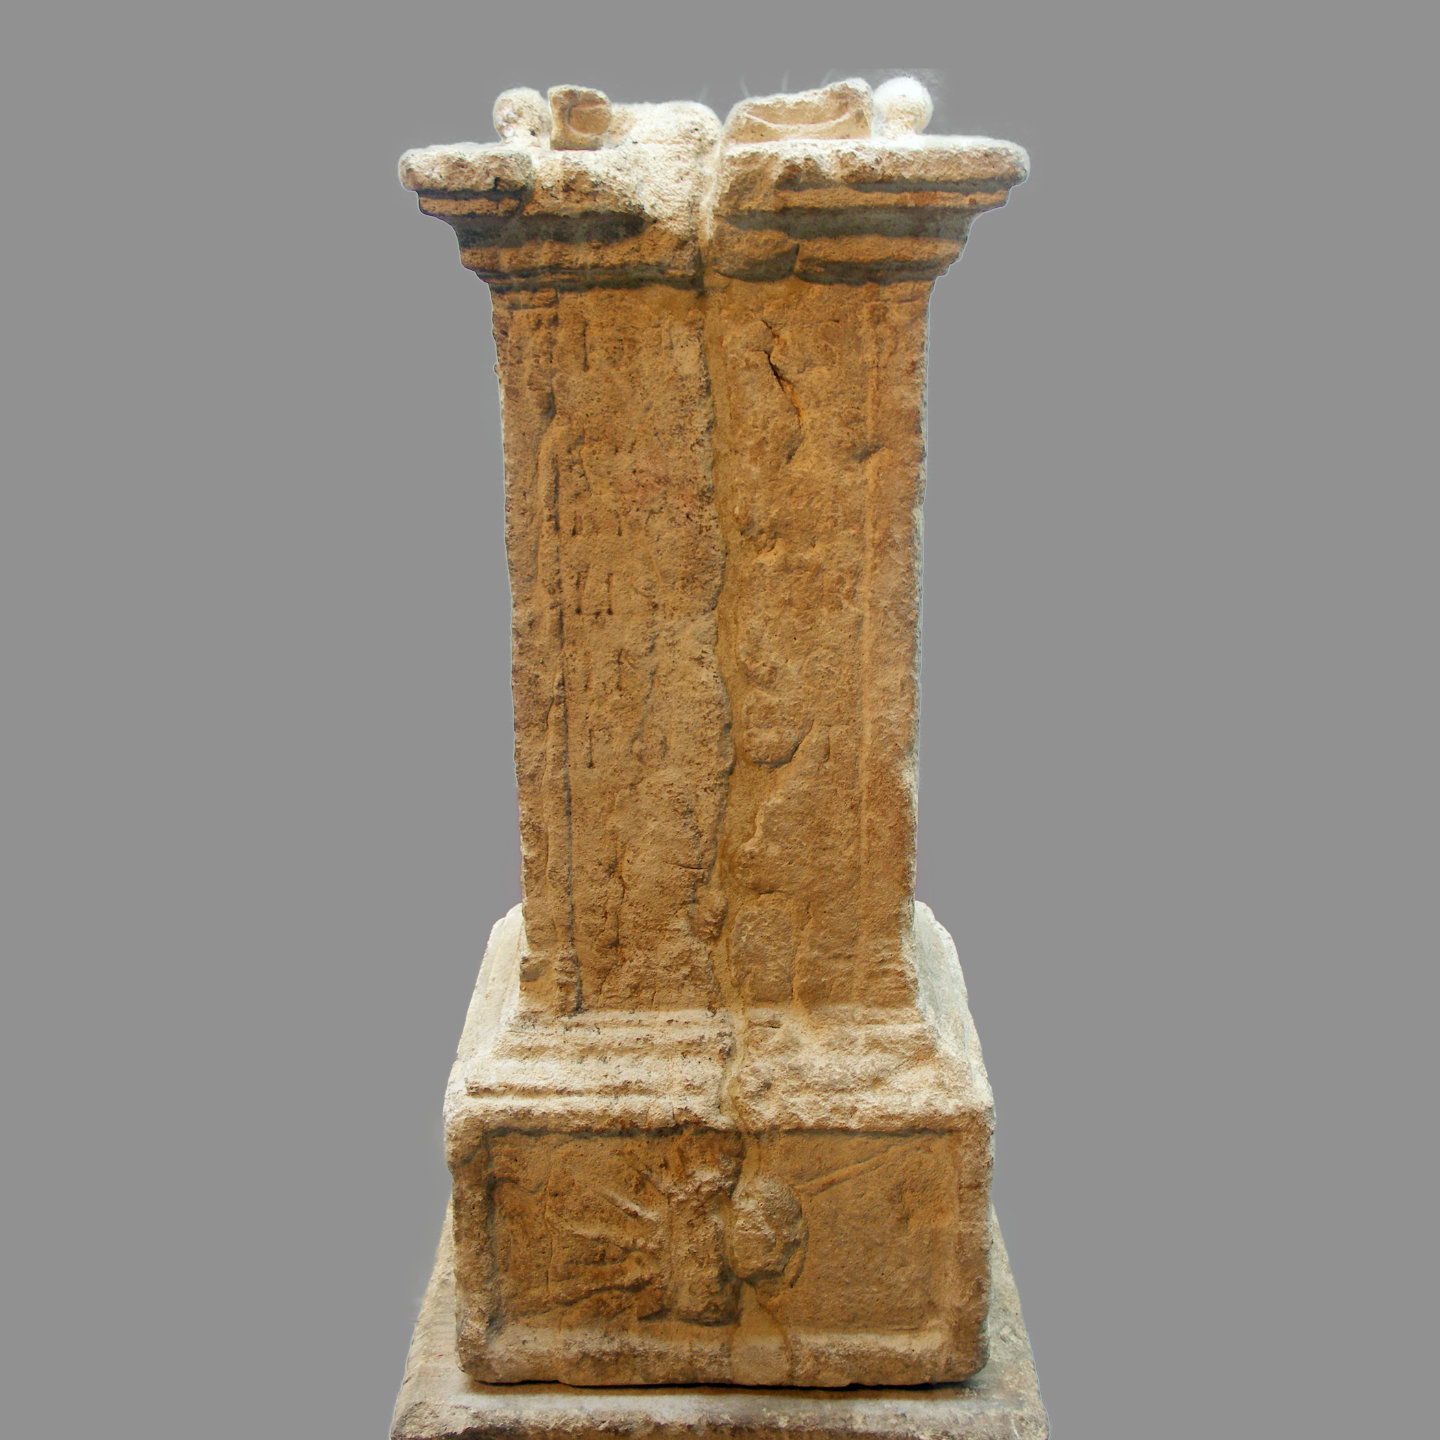 Altar with Sol’s head from Altbachtal